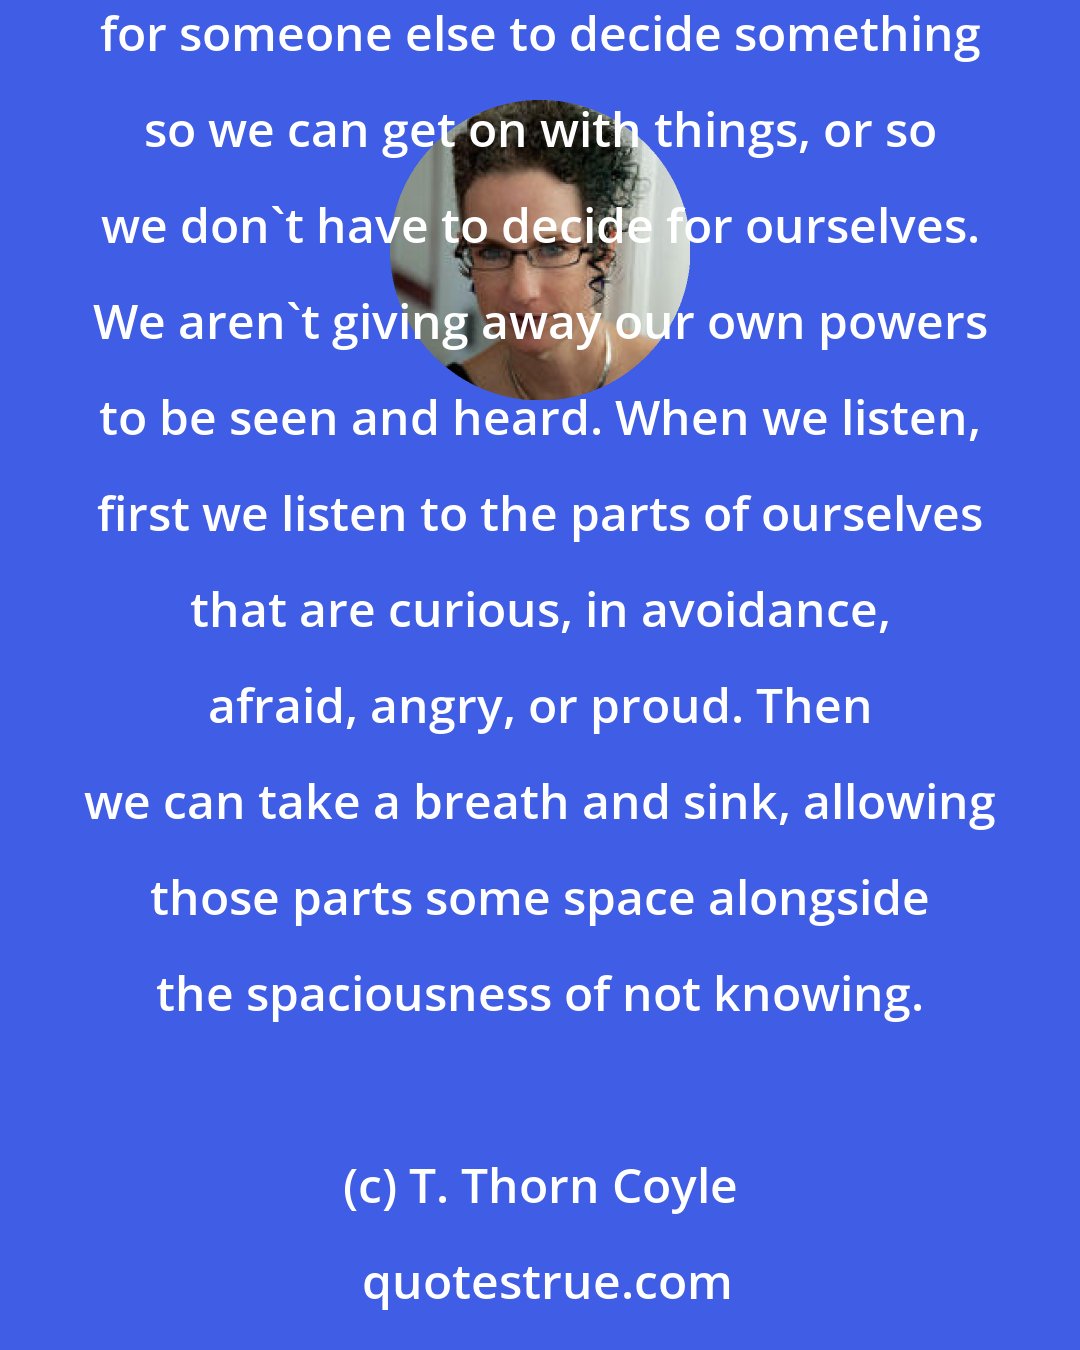 T. Thorn Coyle: True listening is never self-effacement. We bring the whole self to the process, rather than denying self. When we truly listen, we aren't just waiting for someone else to decide something so we can get on with things, or so we don't have to decide for ourselves. We aren't giving away our own powers to be seen and heard. When we listen, first we listen to the parts of ourselves that are curious, in avoidance, afraid, angry, or proud. Then we can take a breath and sink, allowing those parts some space alongside the spaciousness of not knowing.